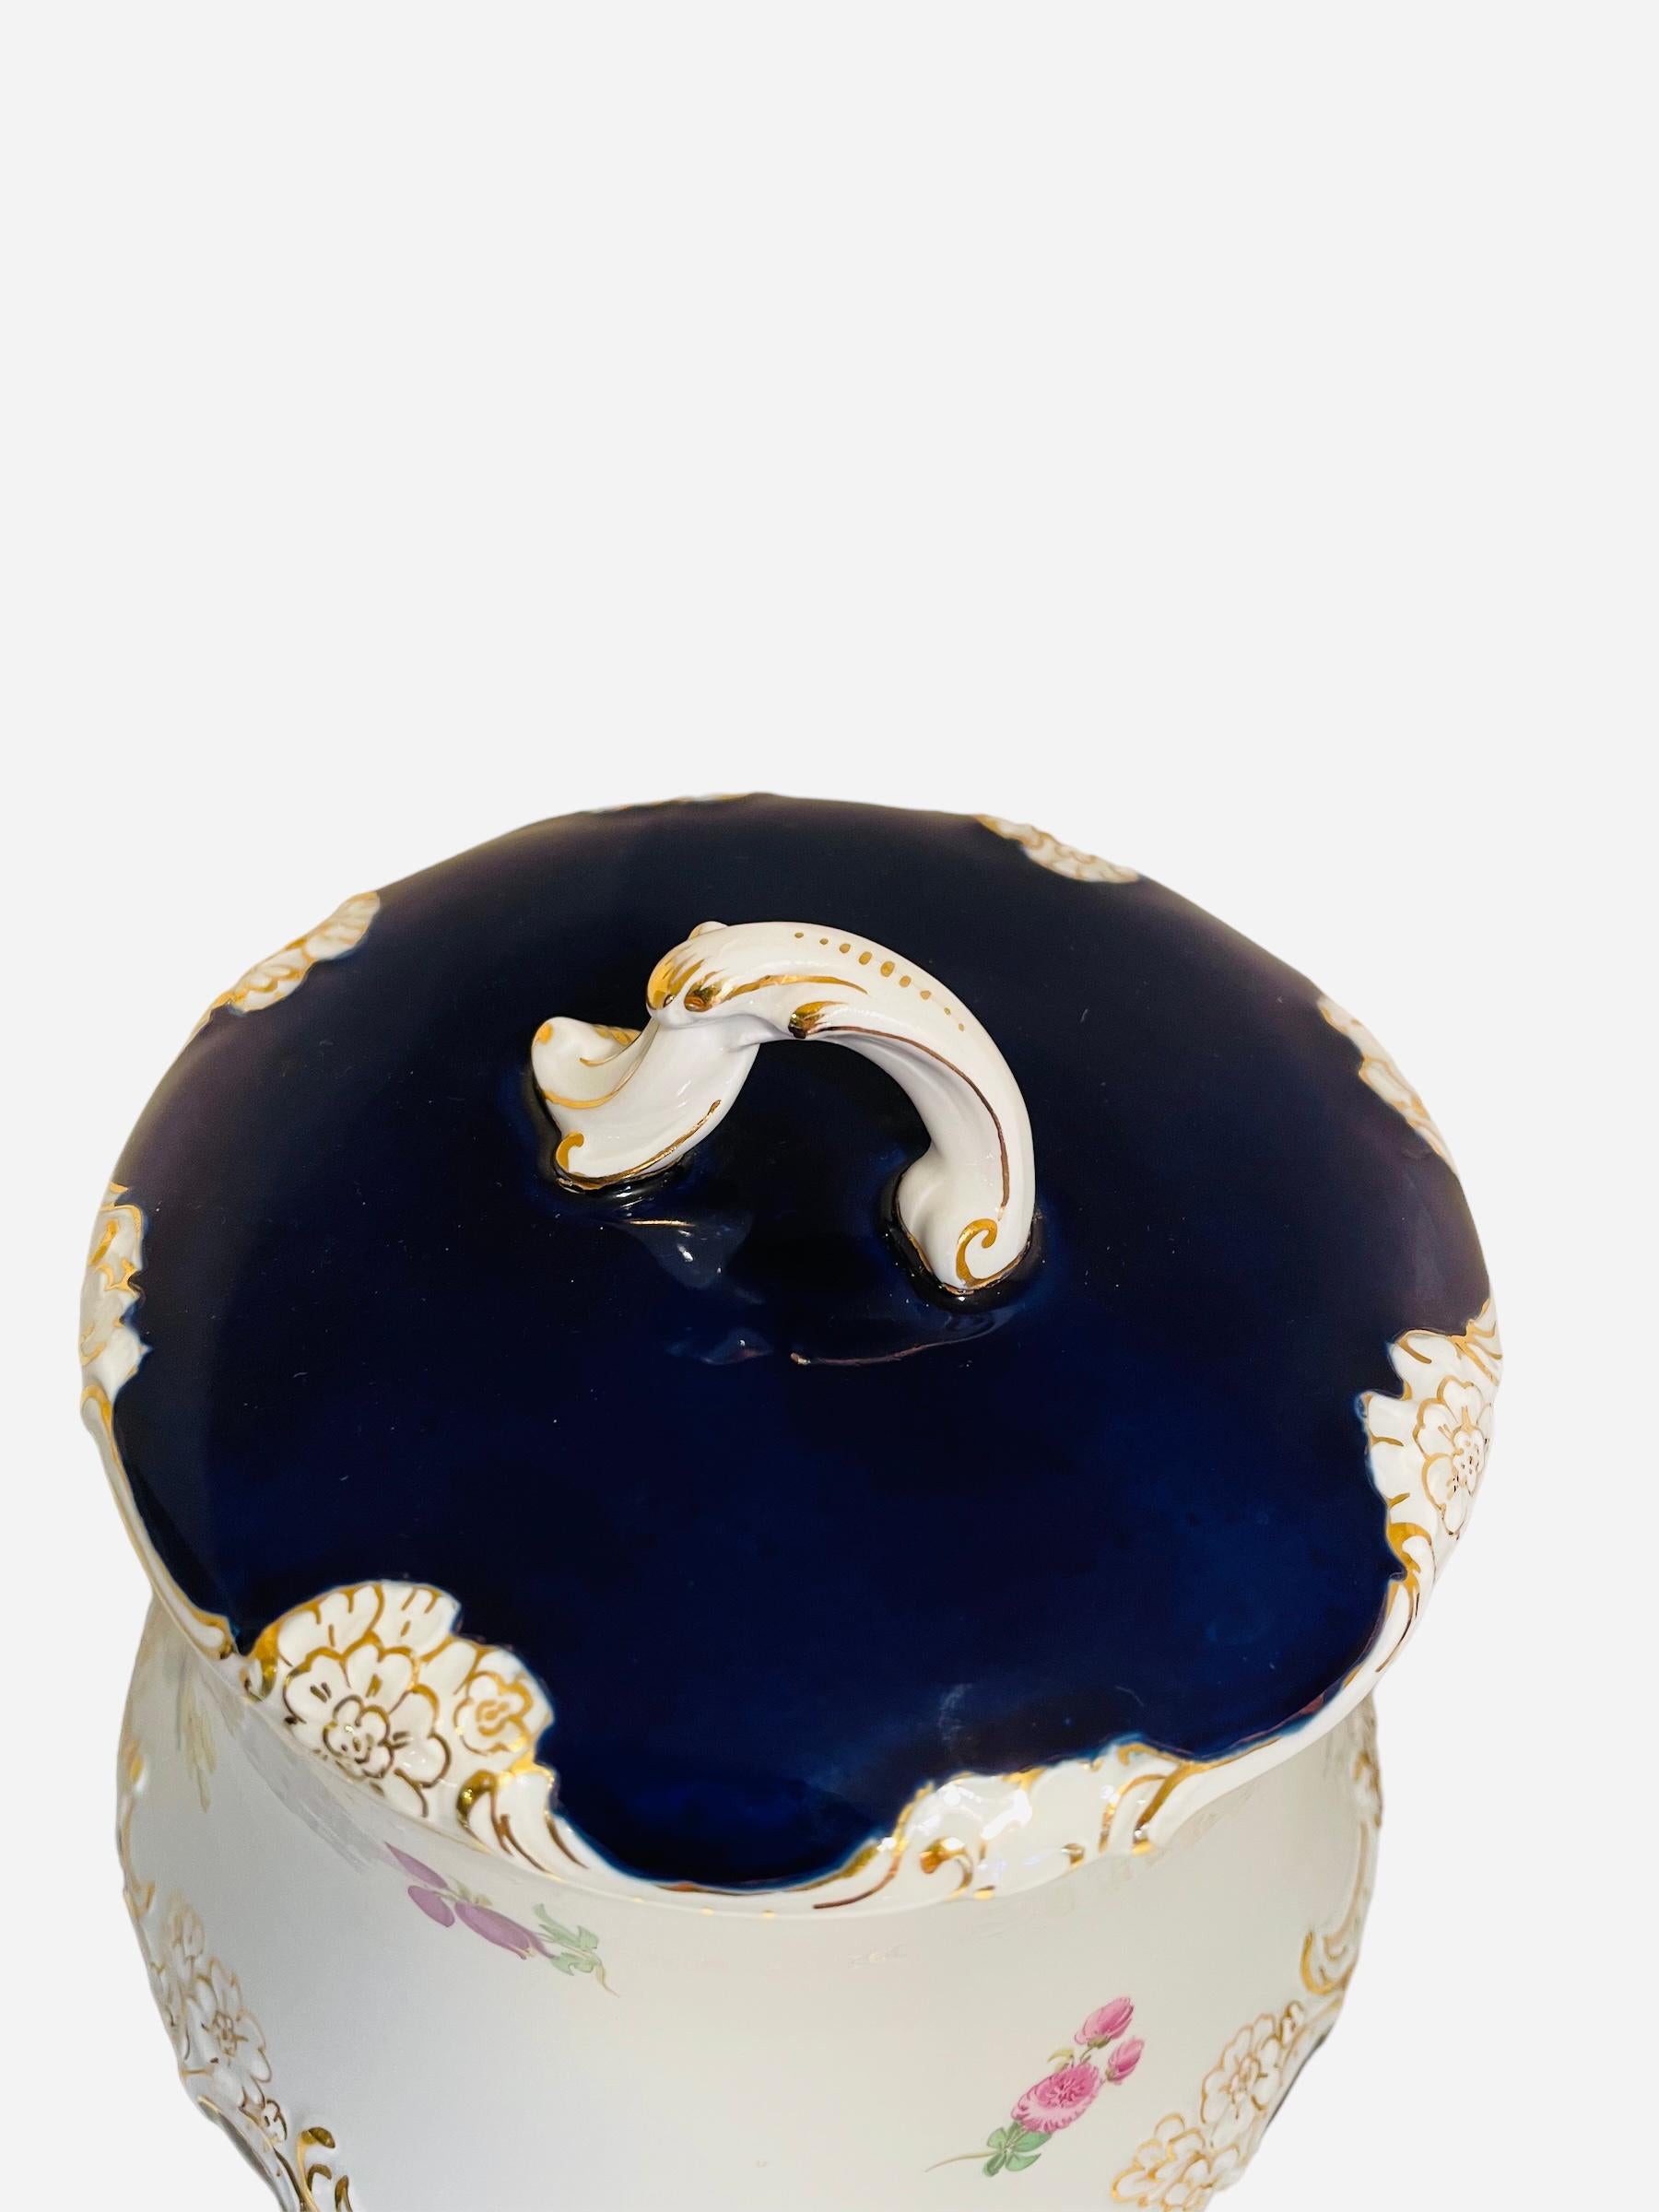 This is a 20th century Meissen porcelain cookie/ginger lidded jar. It depicts a barrel shaped jar hand painted white in the background and cobalt blue in the lid and bottom area. Small bouquets of different flowers adorn the body of the jar. A